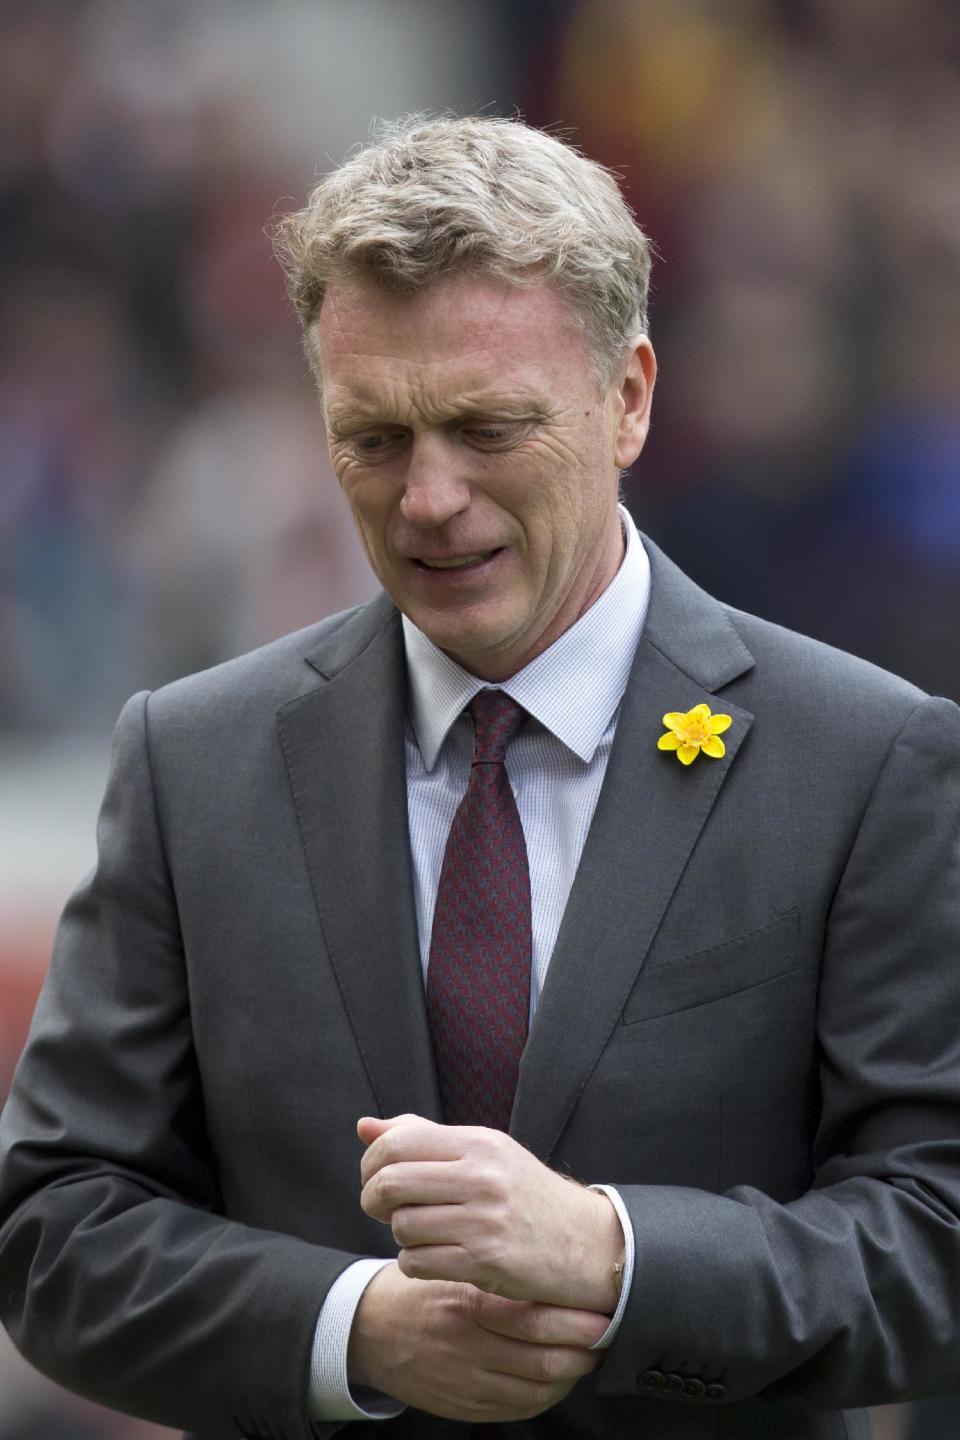 Manchester United's manager David Moyes takes to the touchline before his team's English Premier League soccer match against Liverpool at Old Trafford Stadium, Manchester, England, Sunday March 16, 2014. (AP Photo/Jon Super)